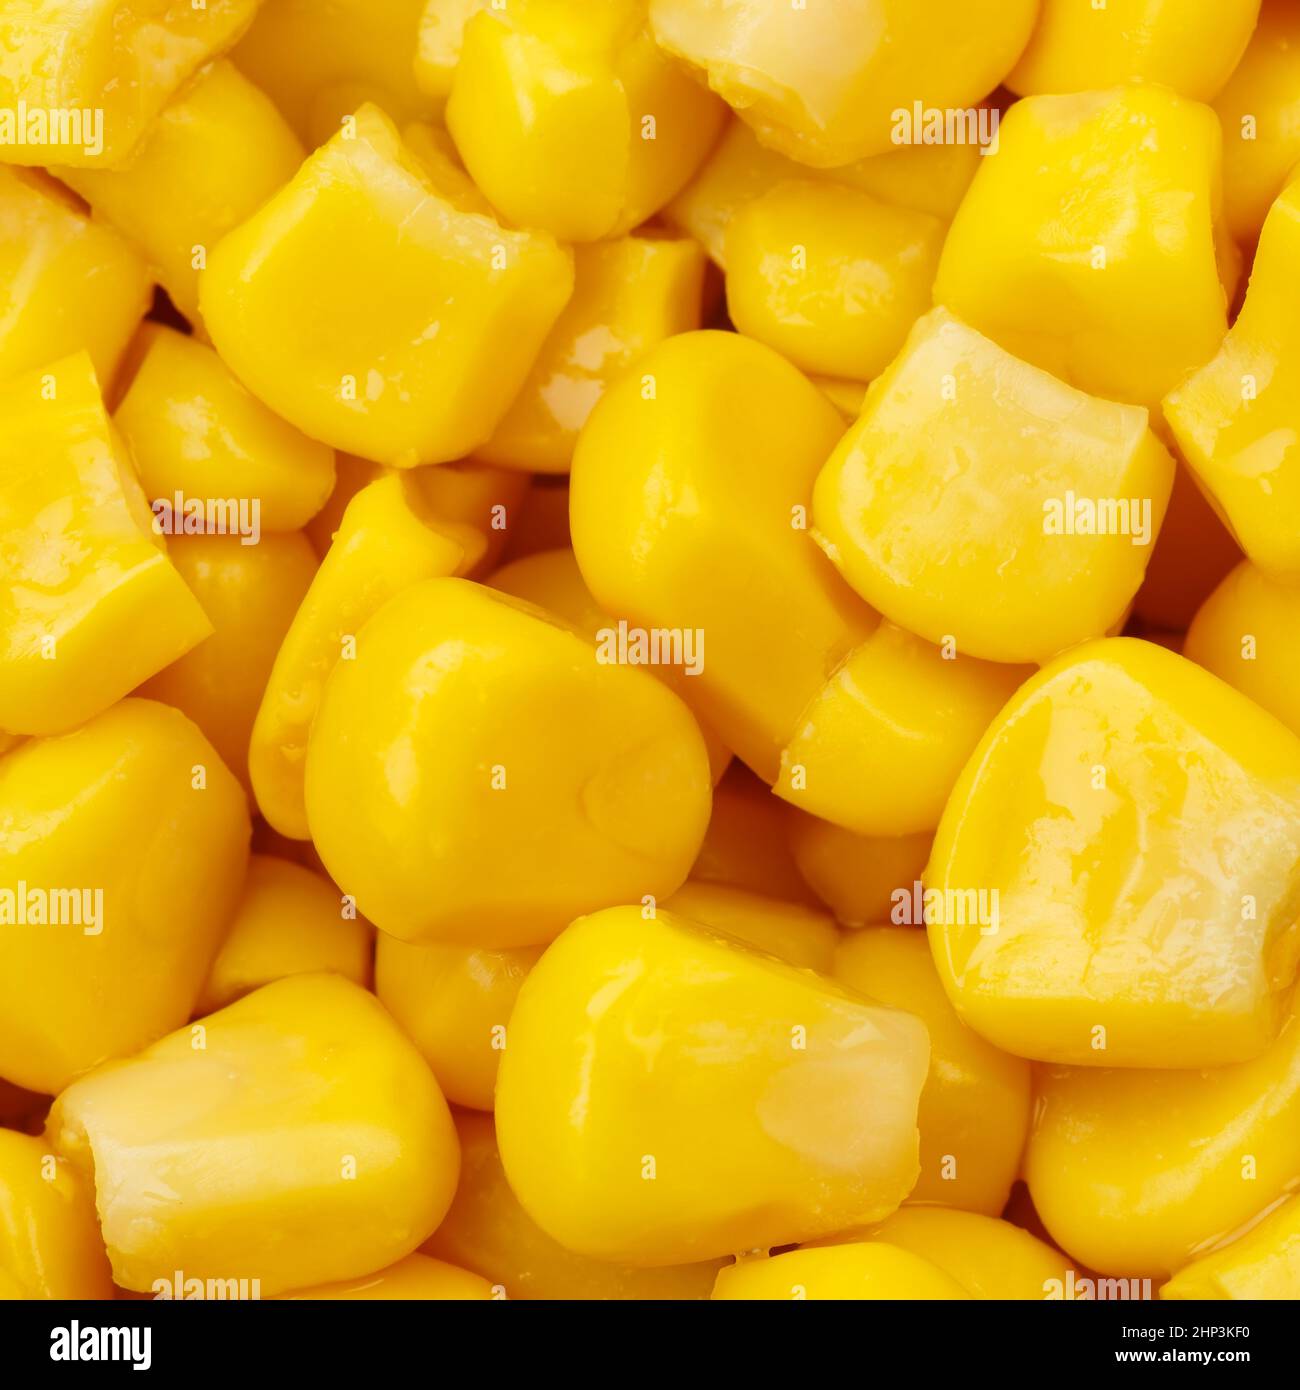 Corn background vegetable vegetables from above square top view Stock Photo